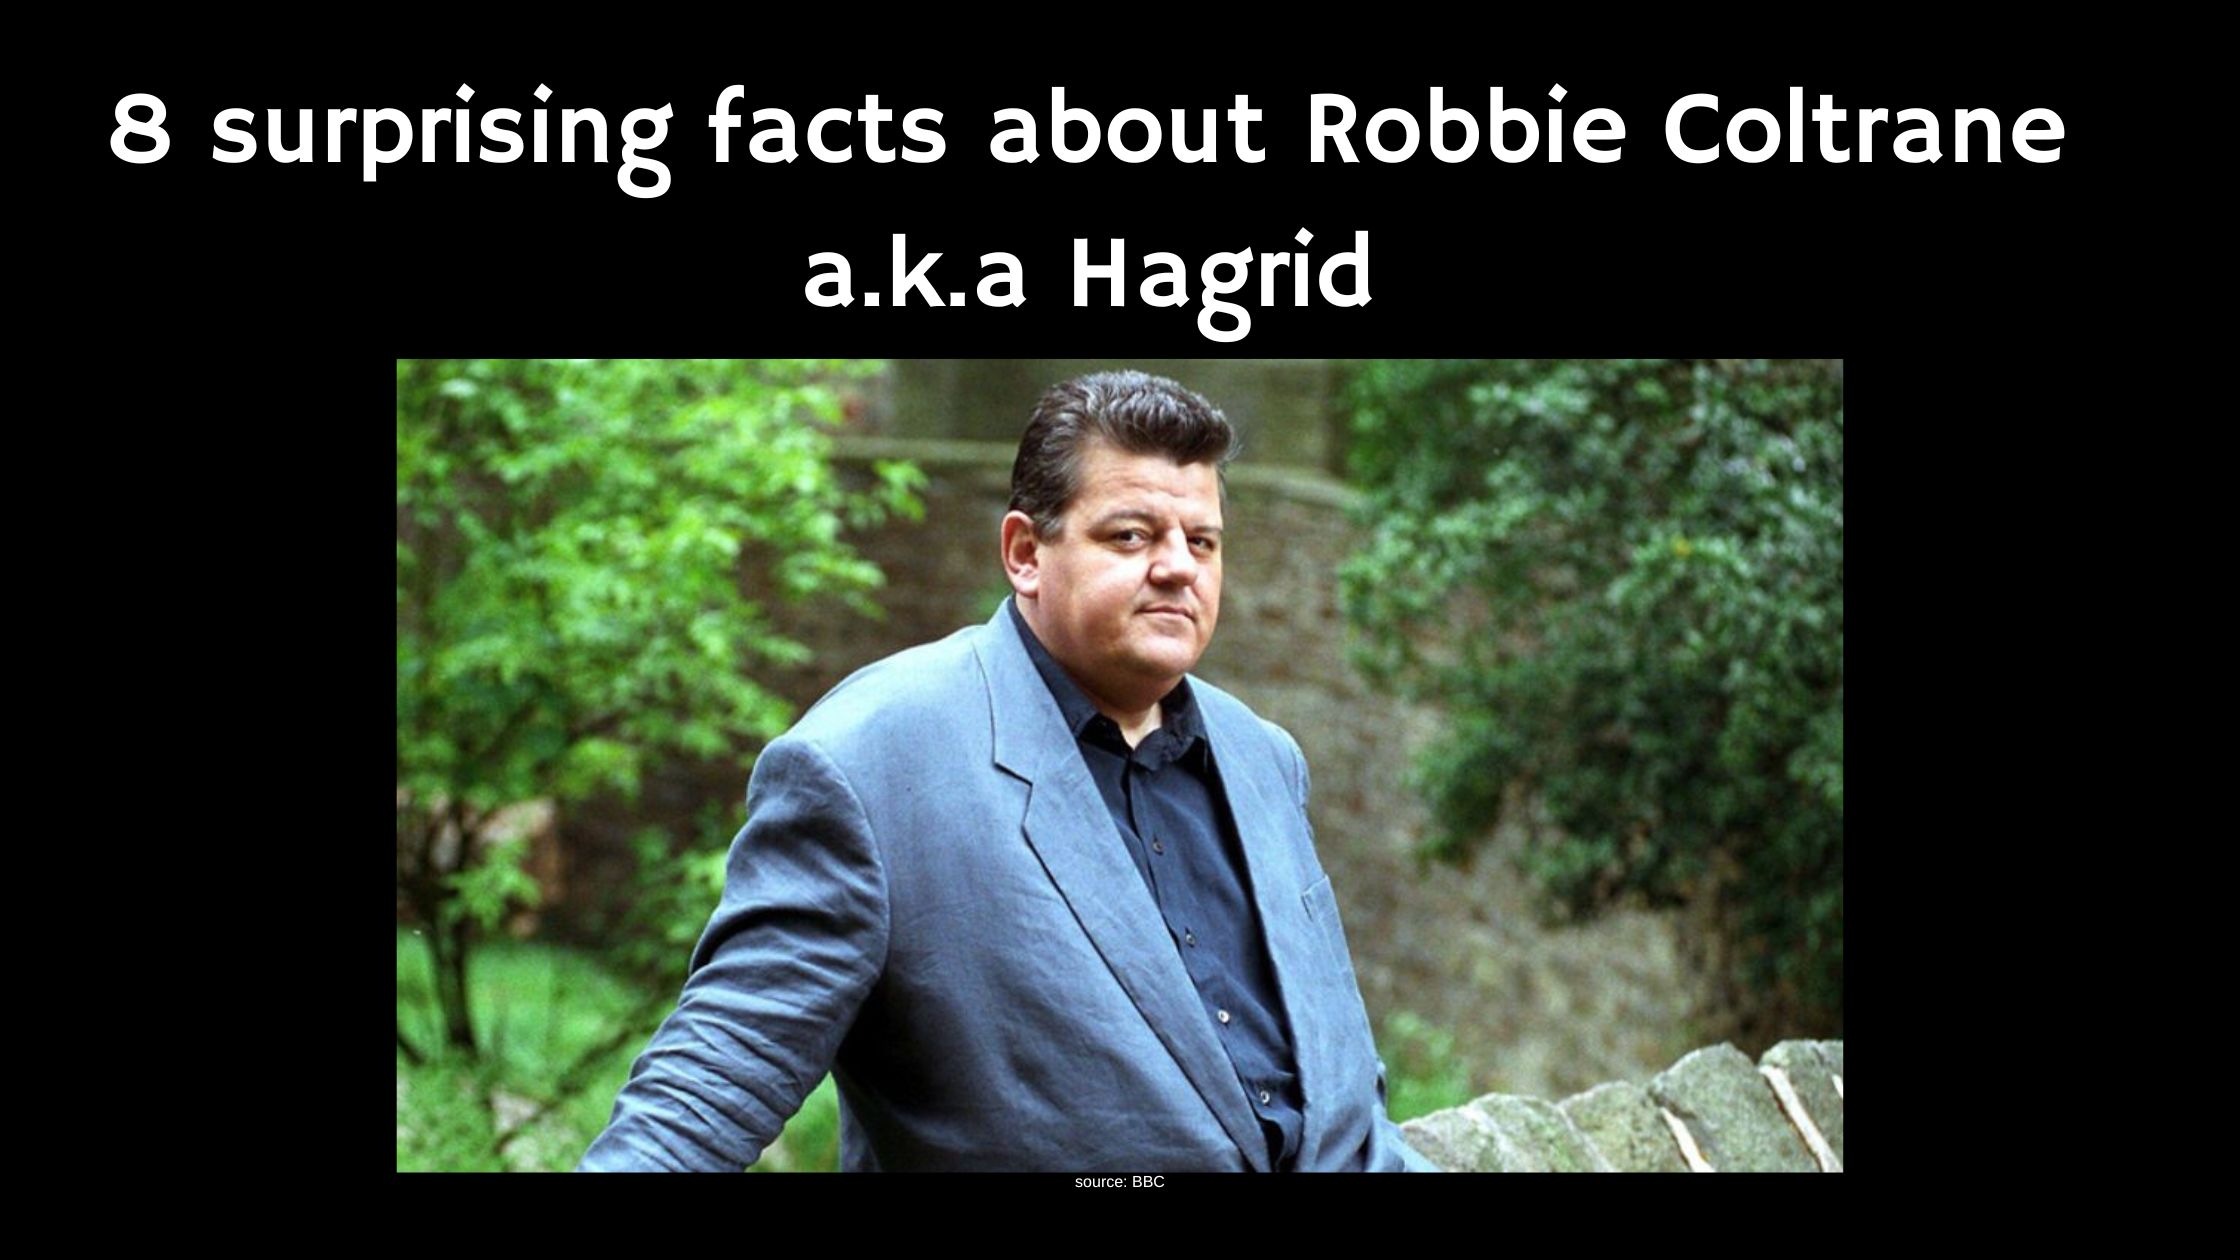 8 surprising facts about Robbie Coltrane a.k.a Hagrid